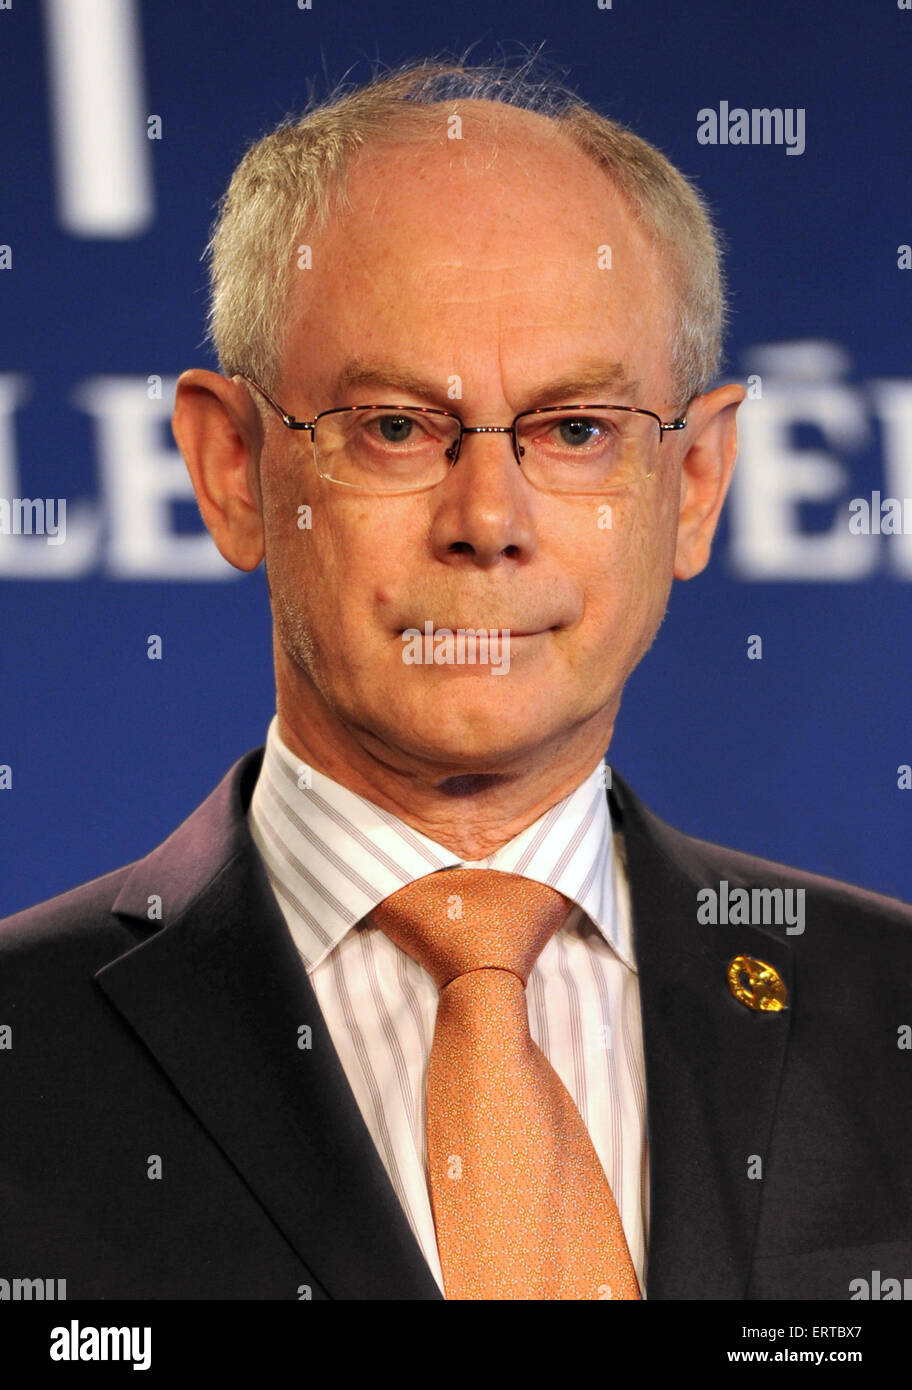 Herman Van Rompuy, President of the European Council, at the press conference at the 37th G8 Summit May 26, 2011 in Deauville, France. Stock Photo